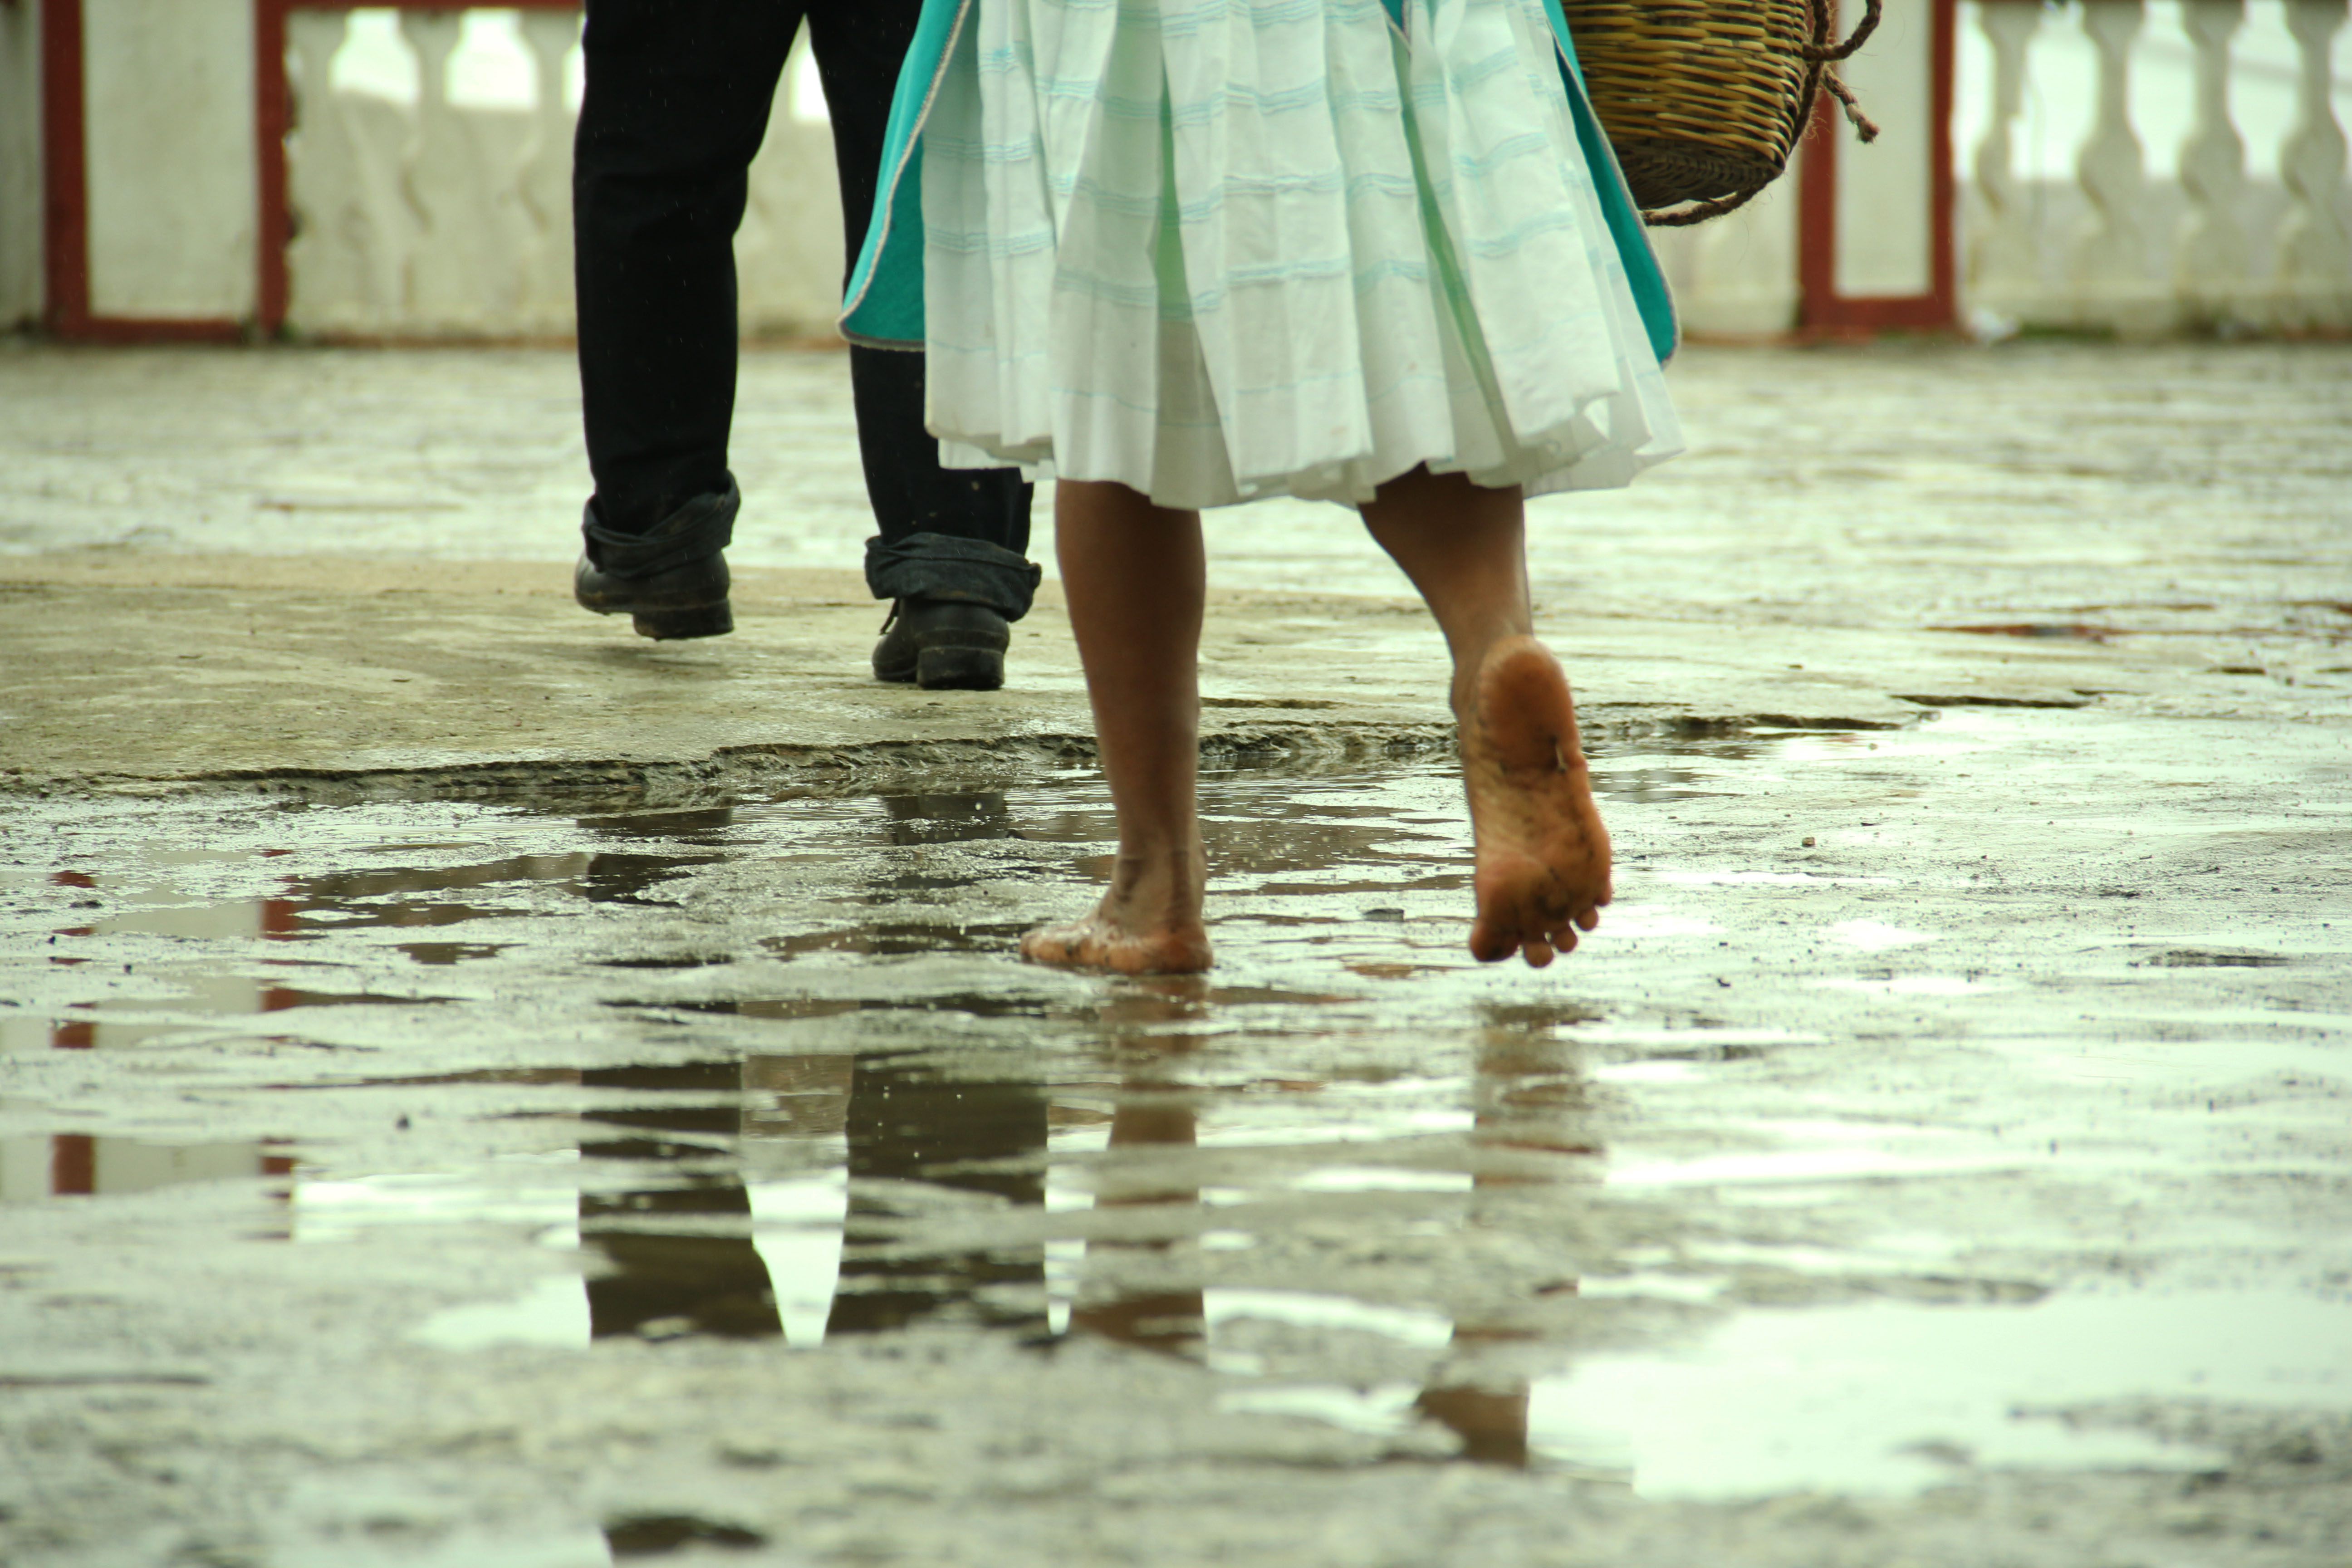 Barefoot woman walking behind her husband as a sign of respect. Sometimes the customs of certain cultures surpass human rights.